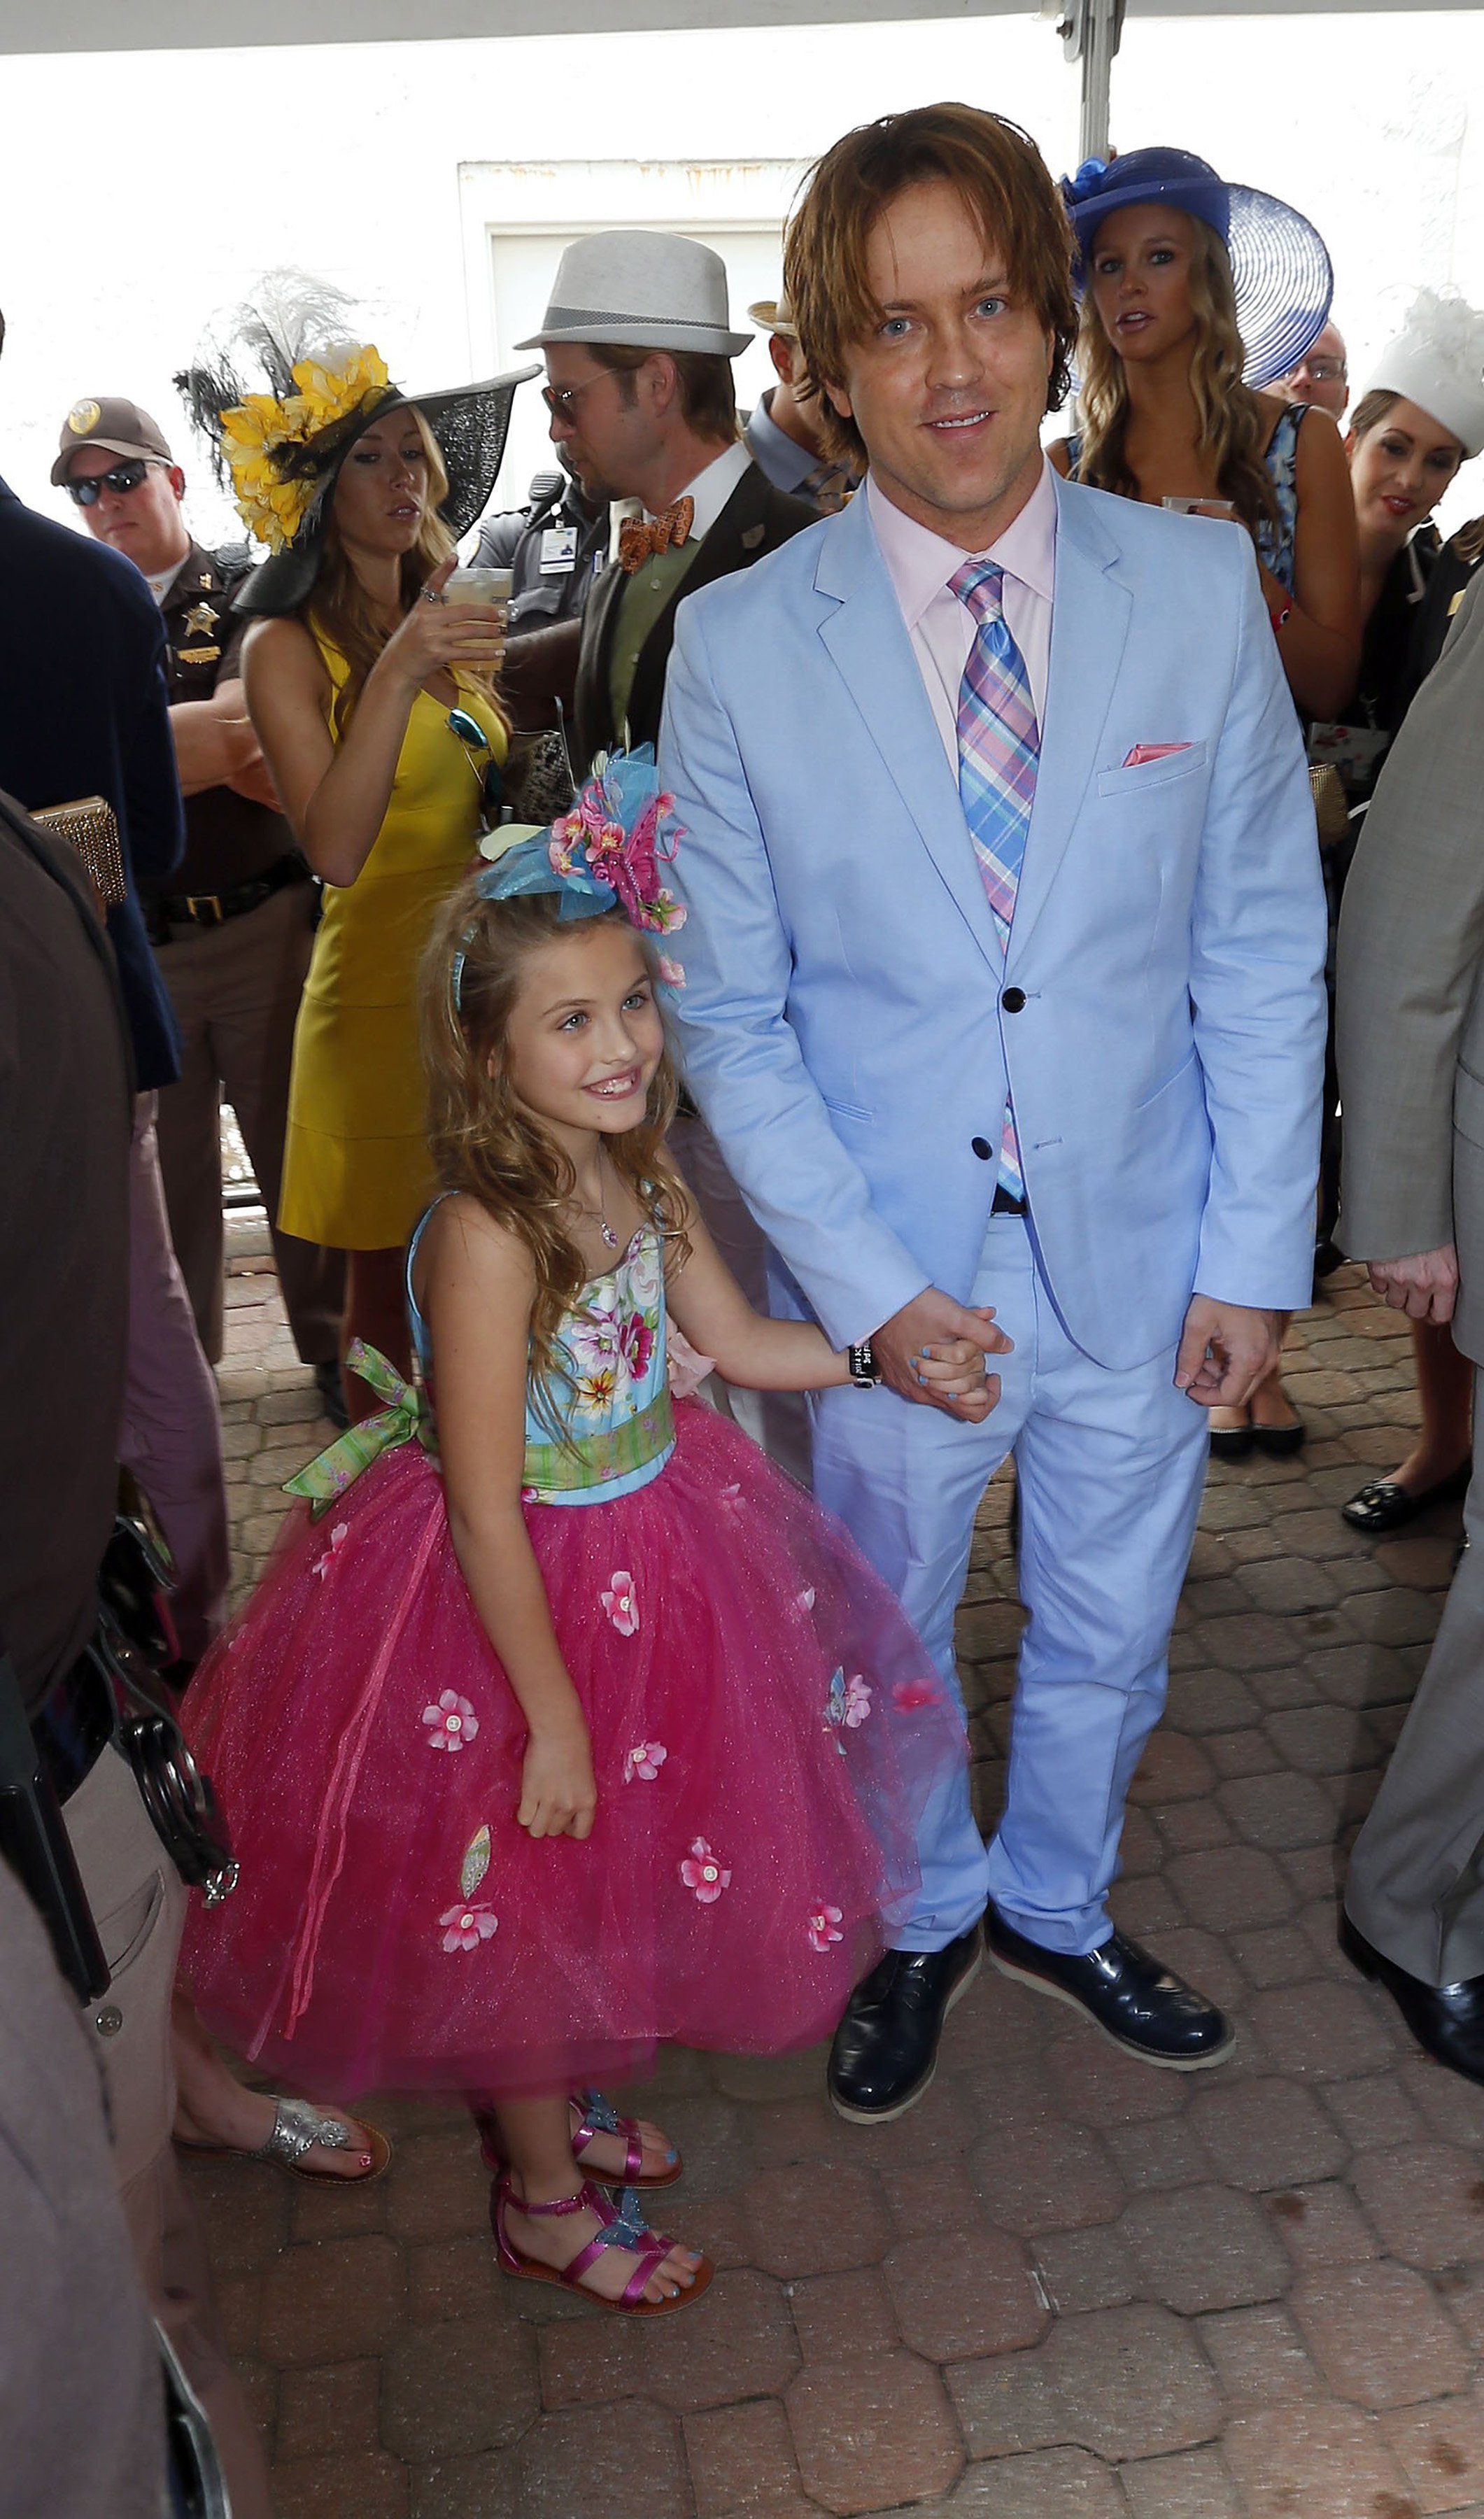 Larry met Anna at the Kentucky Derby